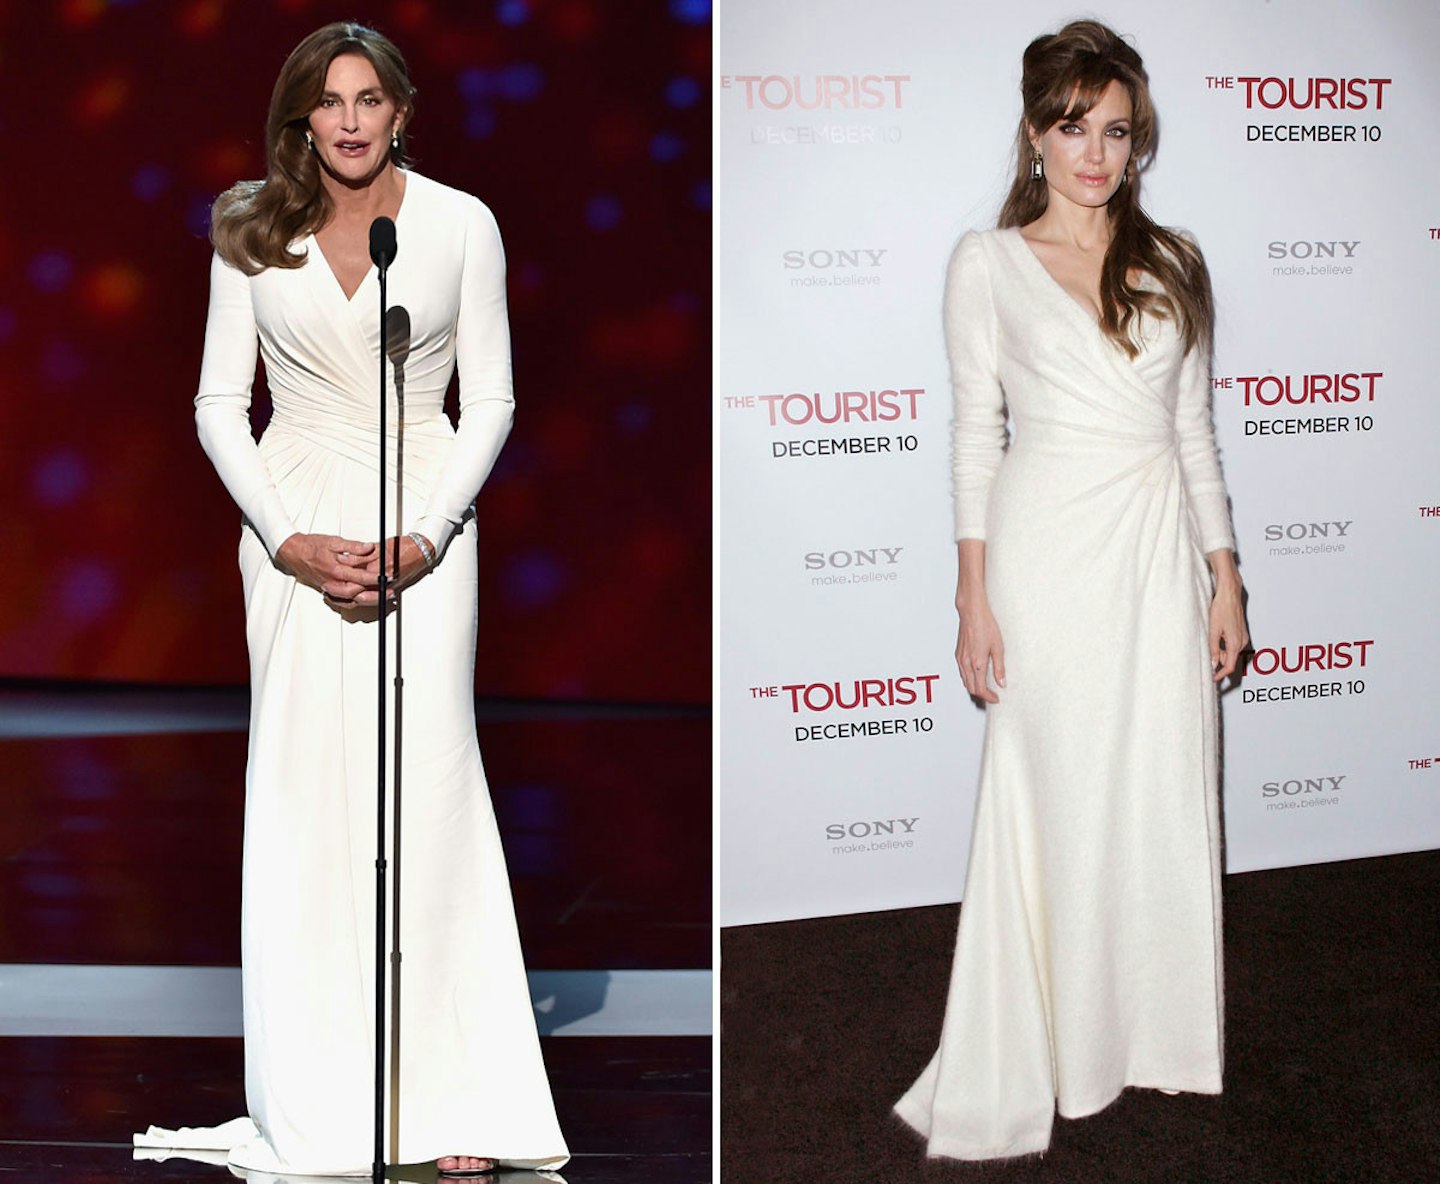 Caitlyn Jenner and Angelina Jolie's Versace [Getty]